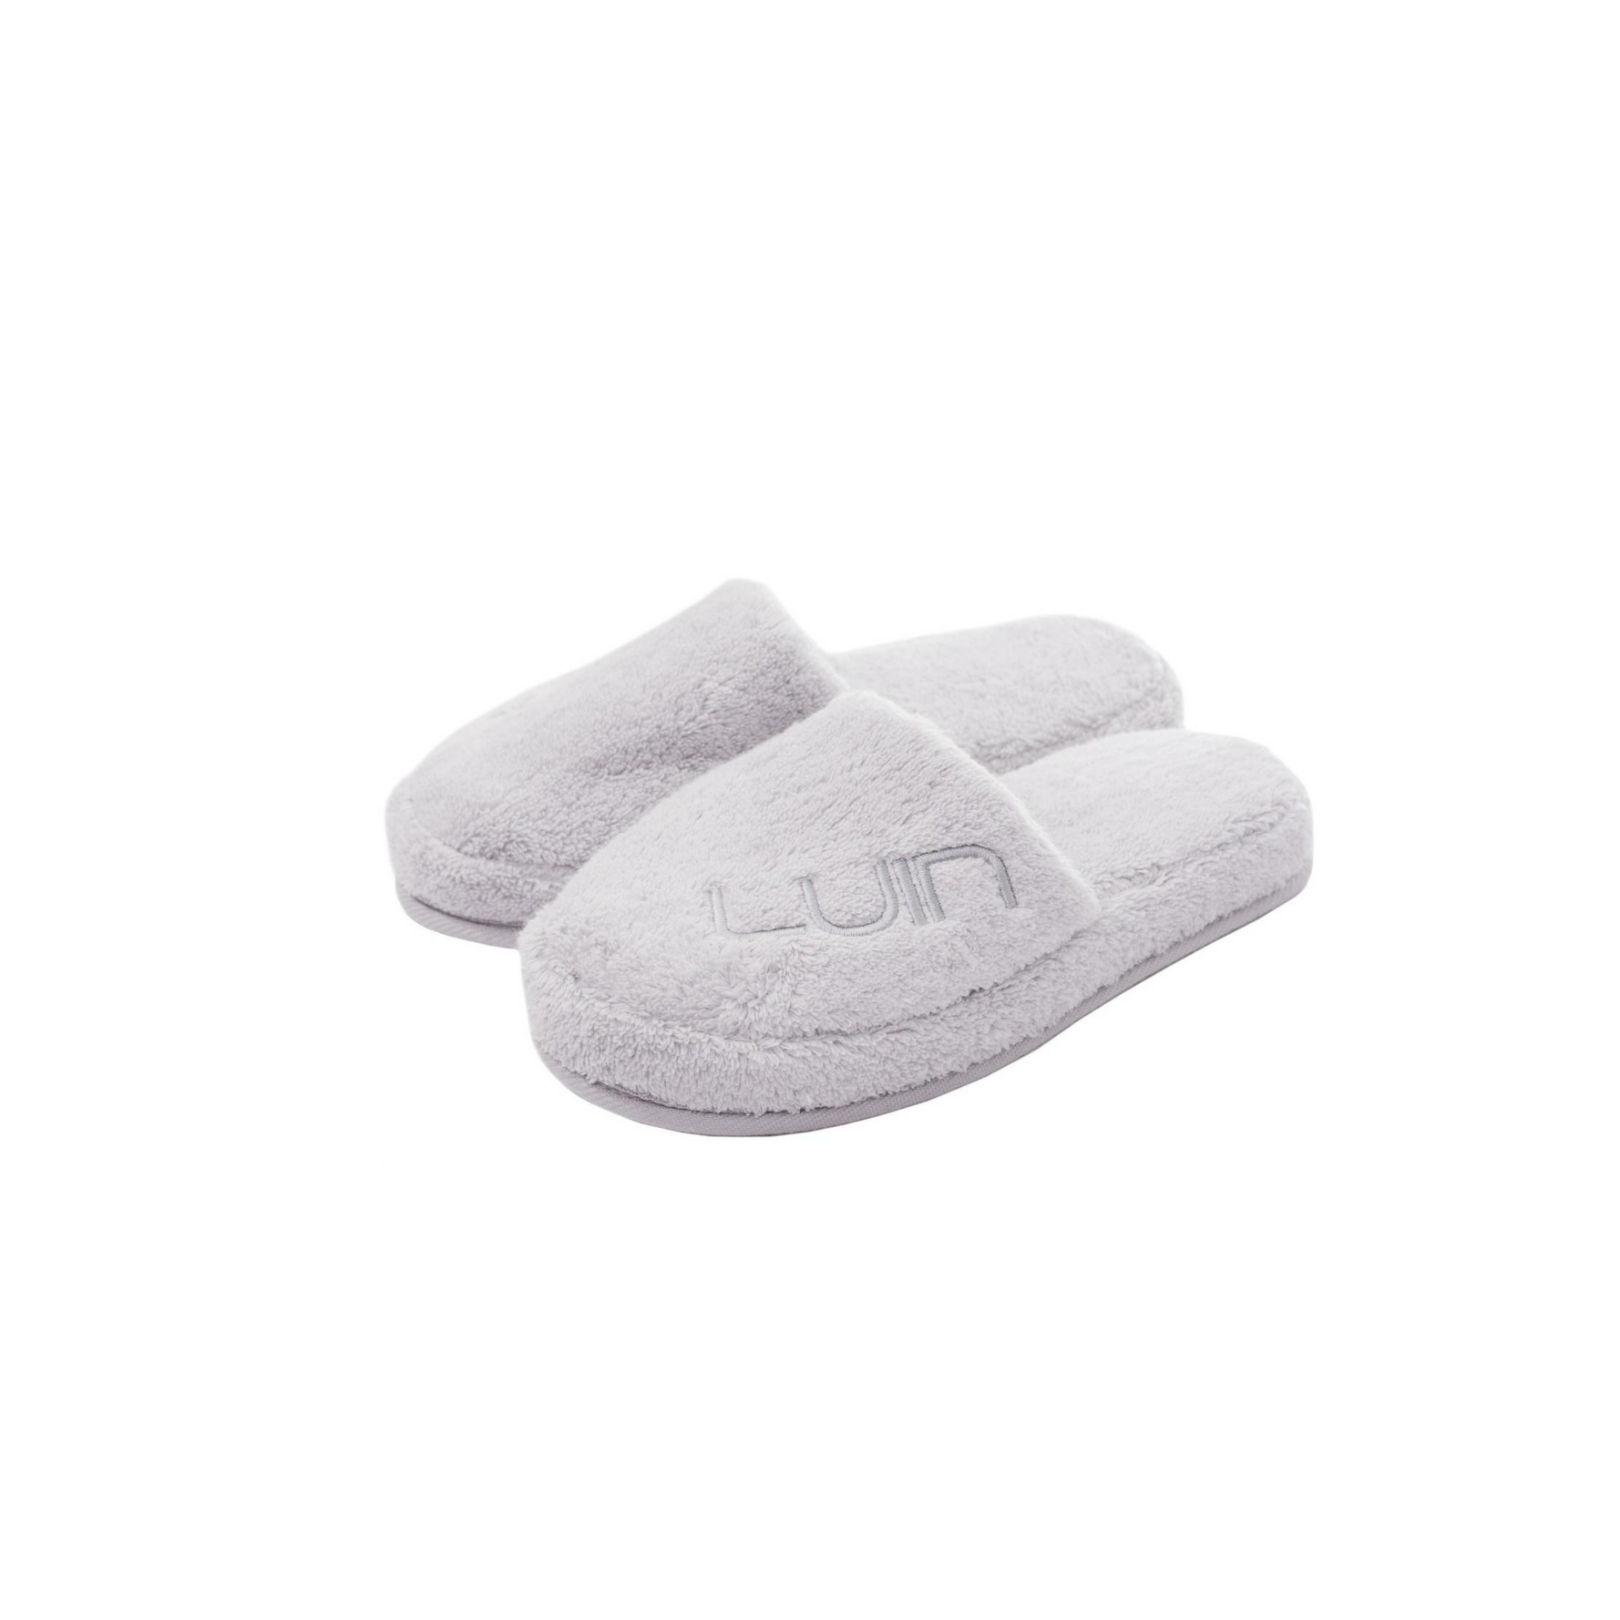 Cosy bath slippers L/XL 41-44 pearl grey Luin Living Your Home Your Spa